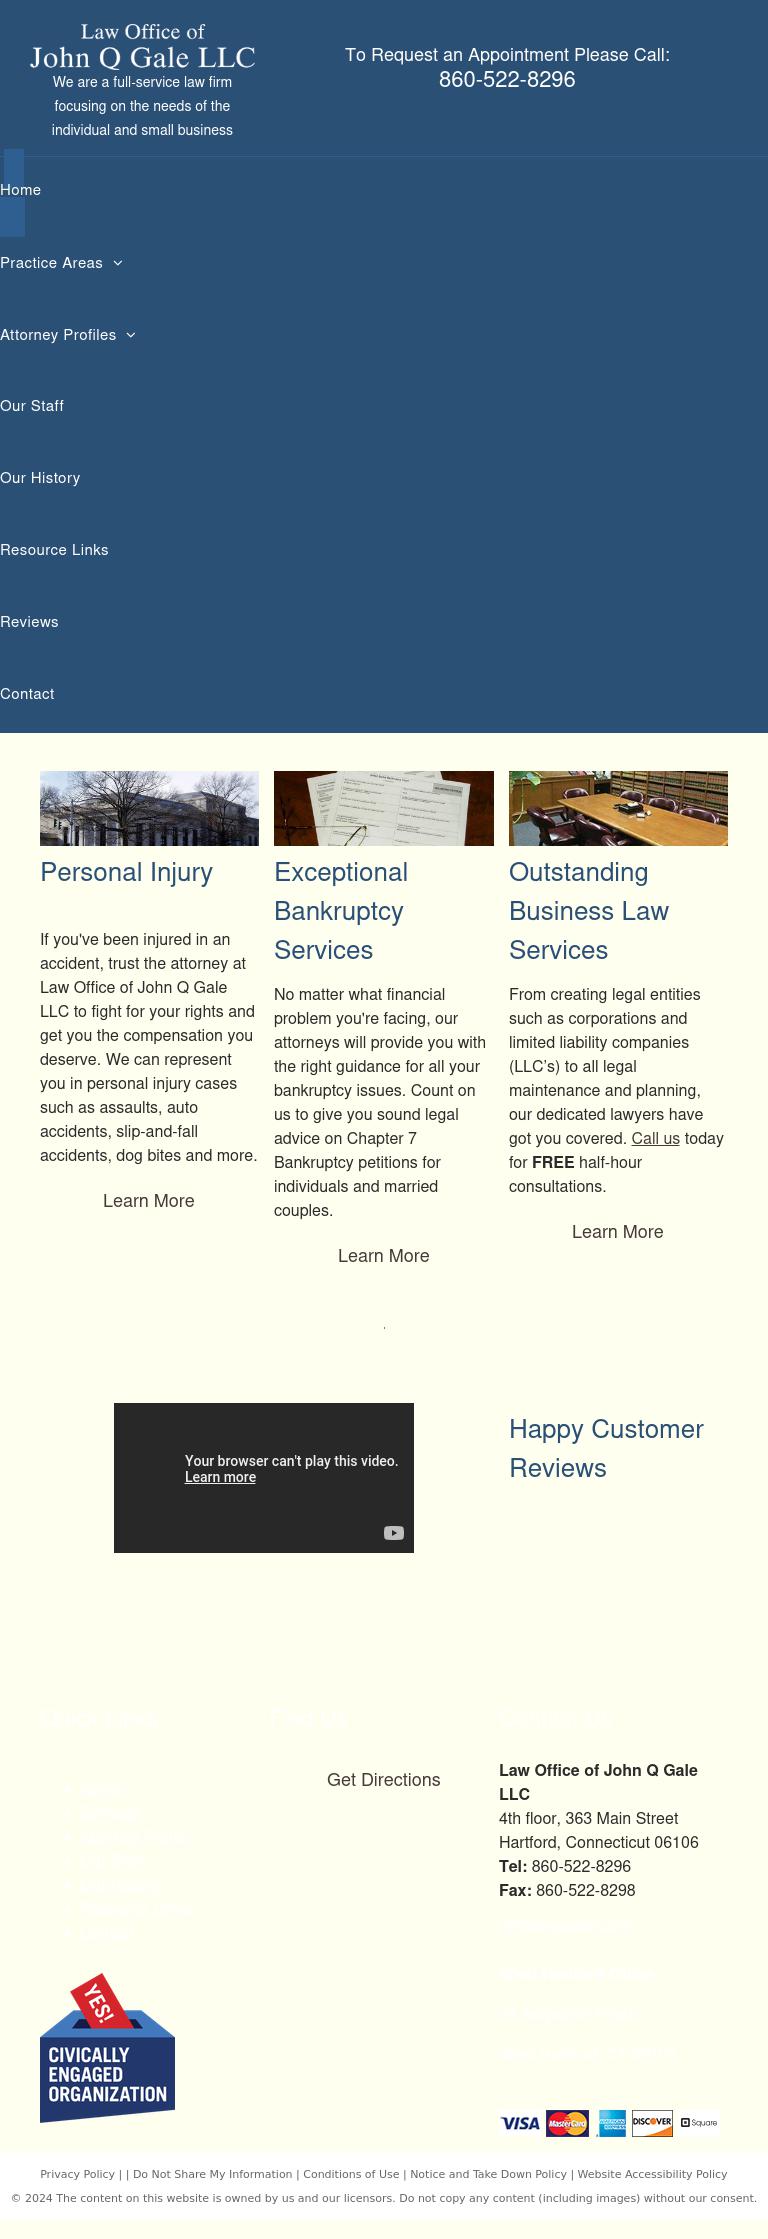 Gale Law Firm - Hartford CT Lawyers